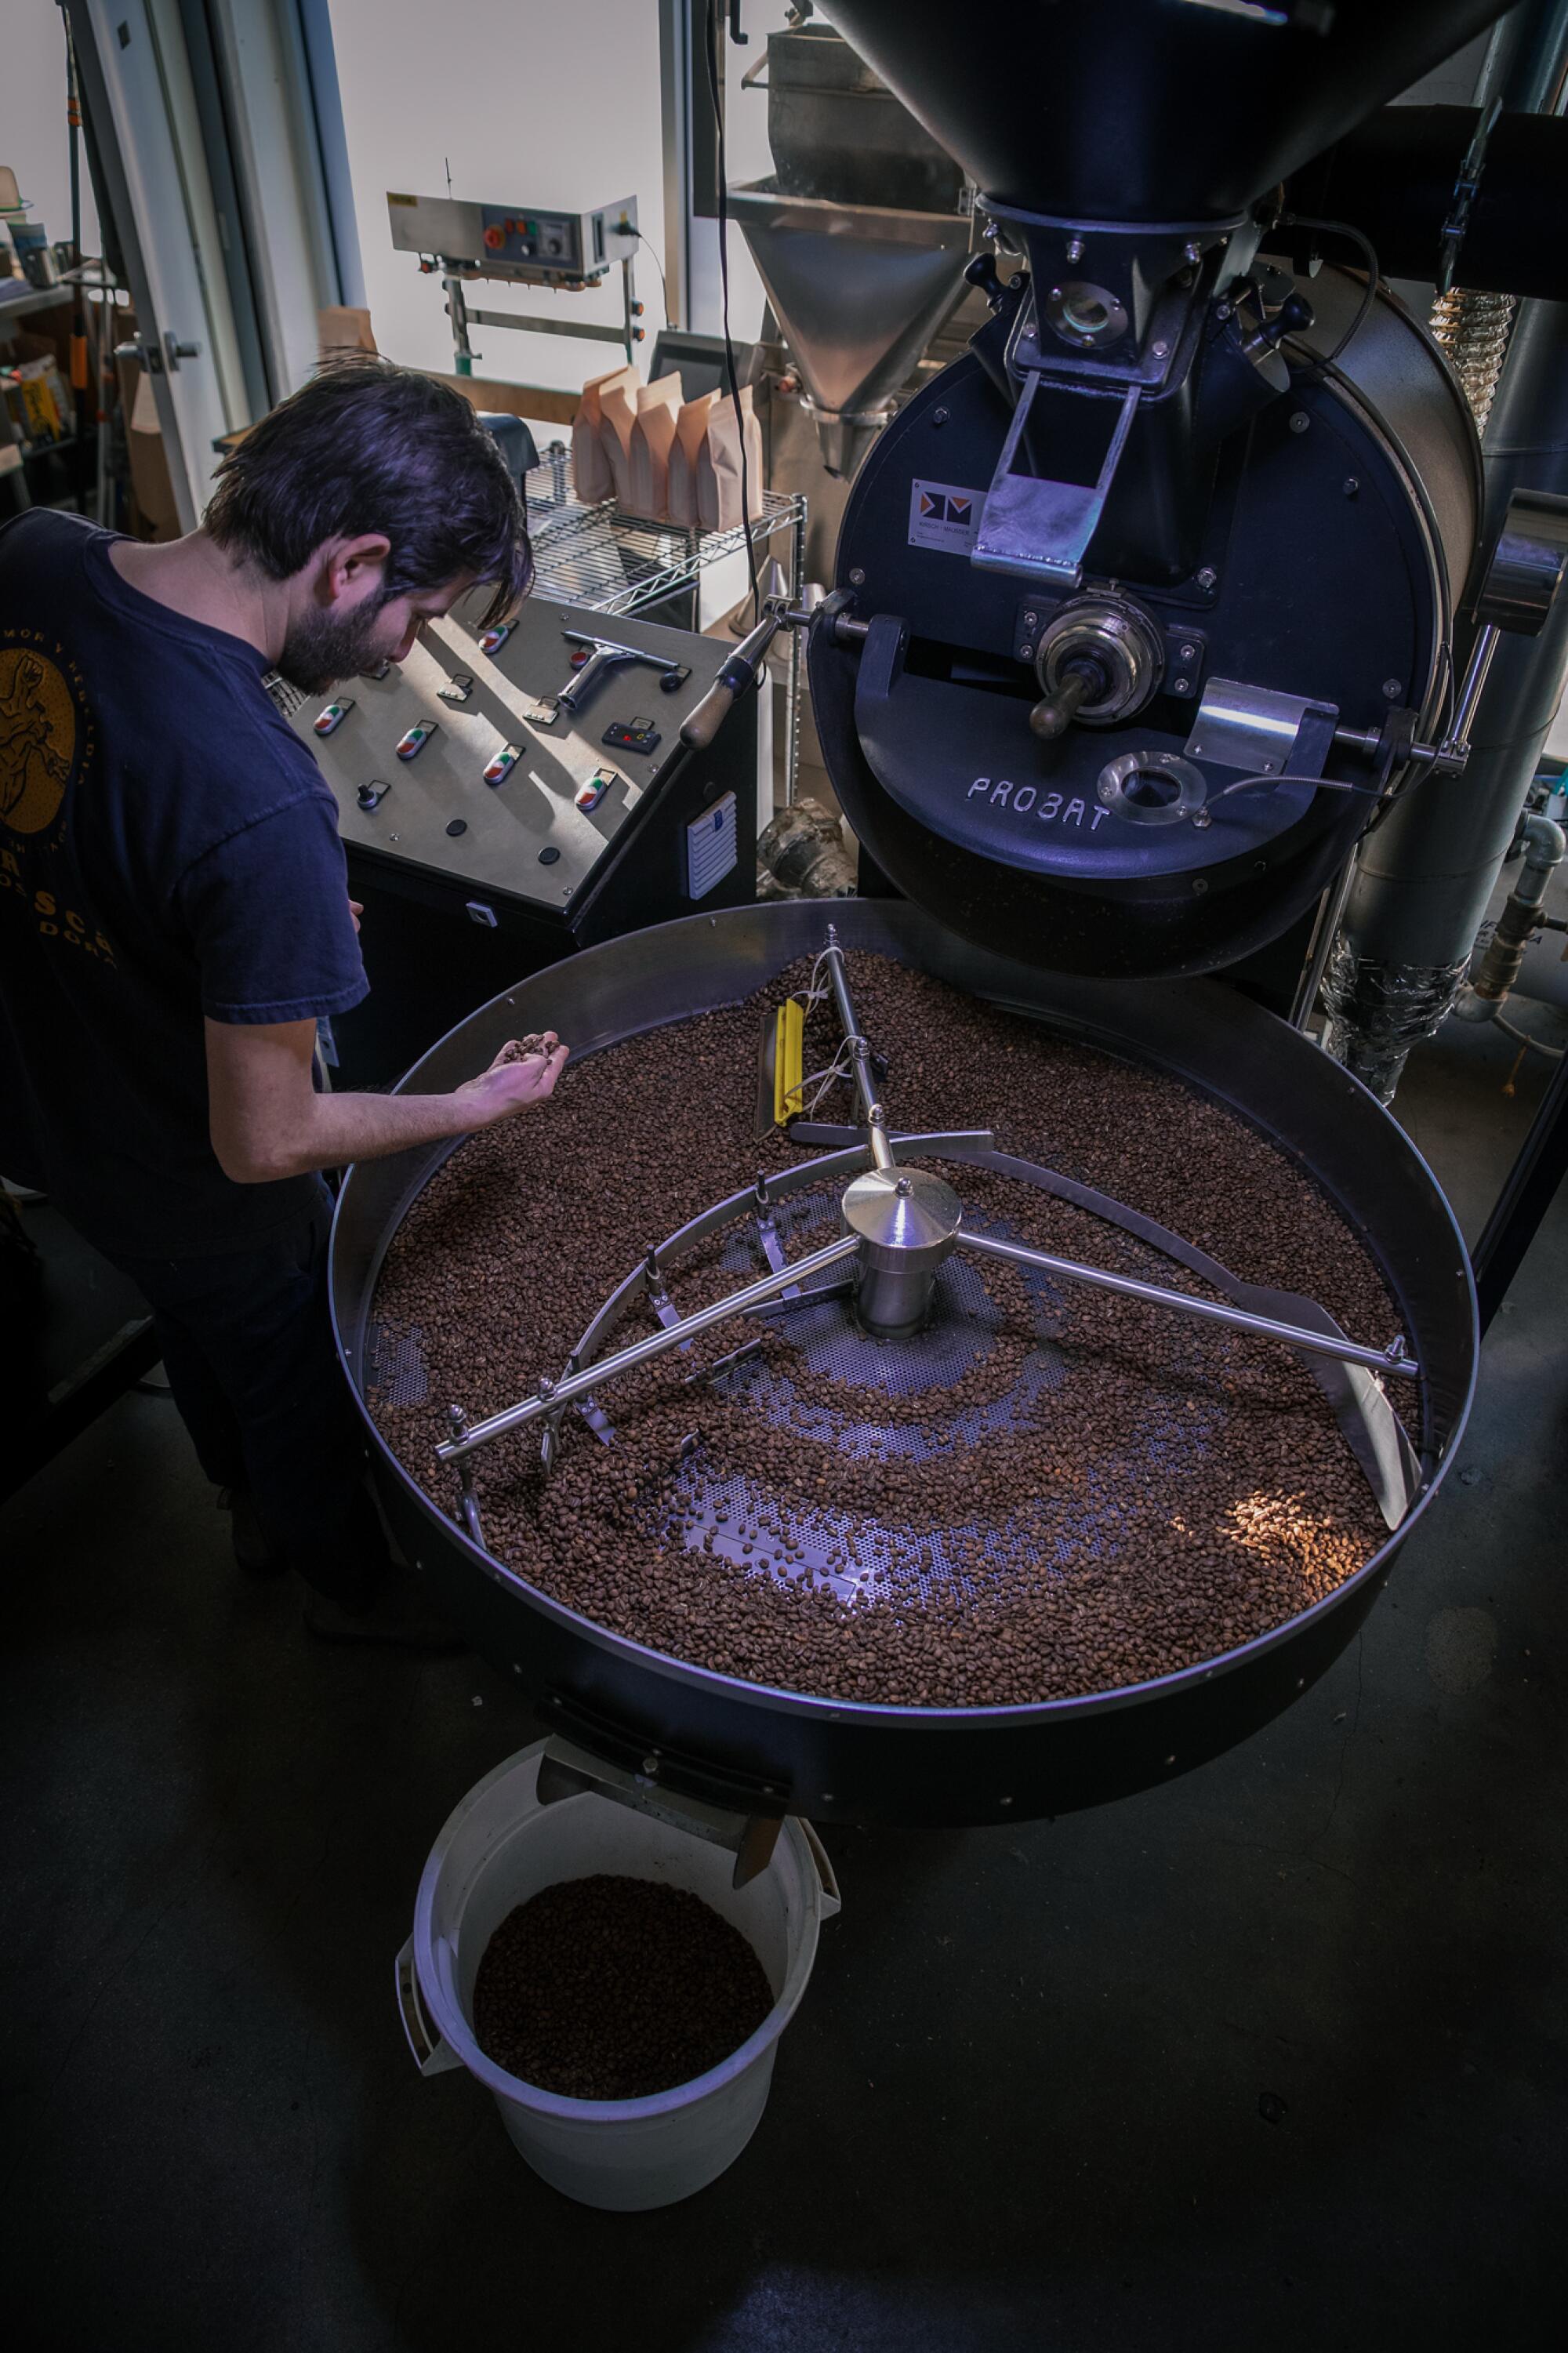 Leonardo Abularach, co-owner of Picaresca, inspects coffee beans while roasting them at Cognoscenti Coffee in Los Angeles.